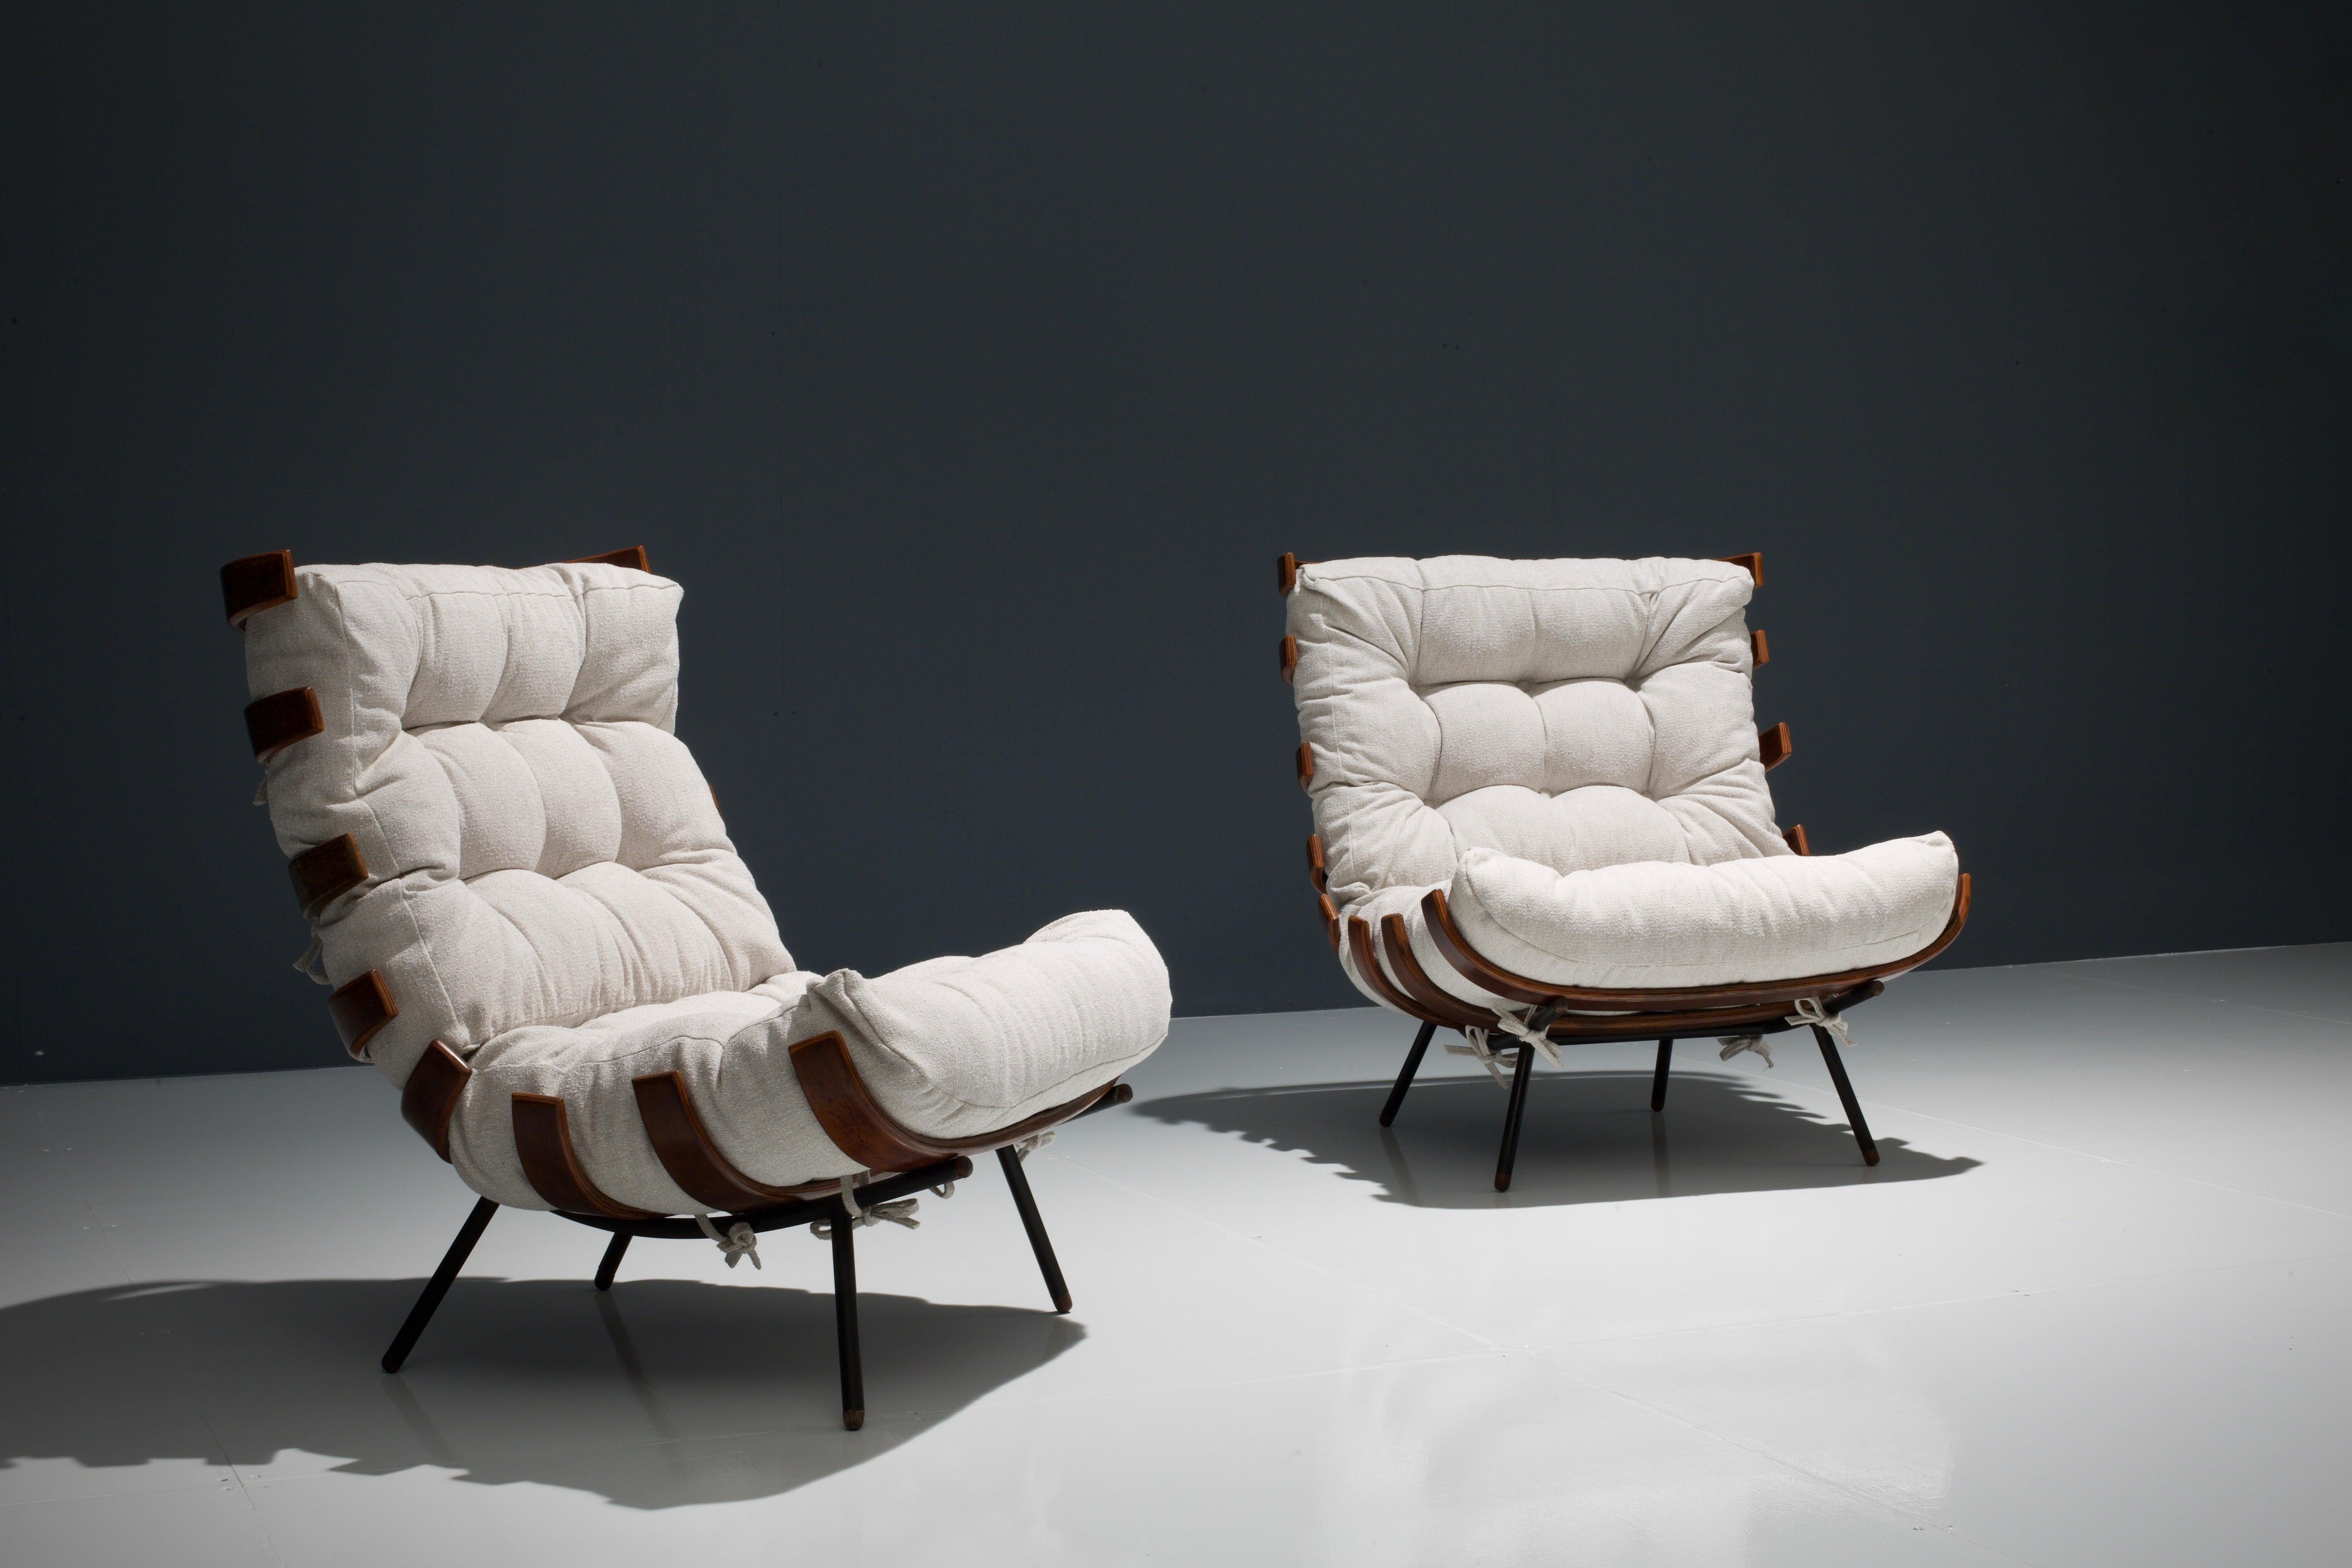 Wonderful older pair of 'Costela' lounge chairs designed by Martin Eisler in 1953 and manufactured by the companies Móveis Artesanal and Forma. The word 'costela' means rib in Portuguese, referring to the eight wooden slats in the bone-like frame.